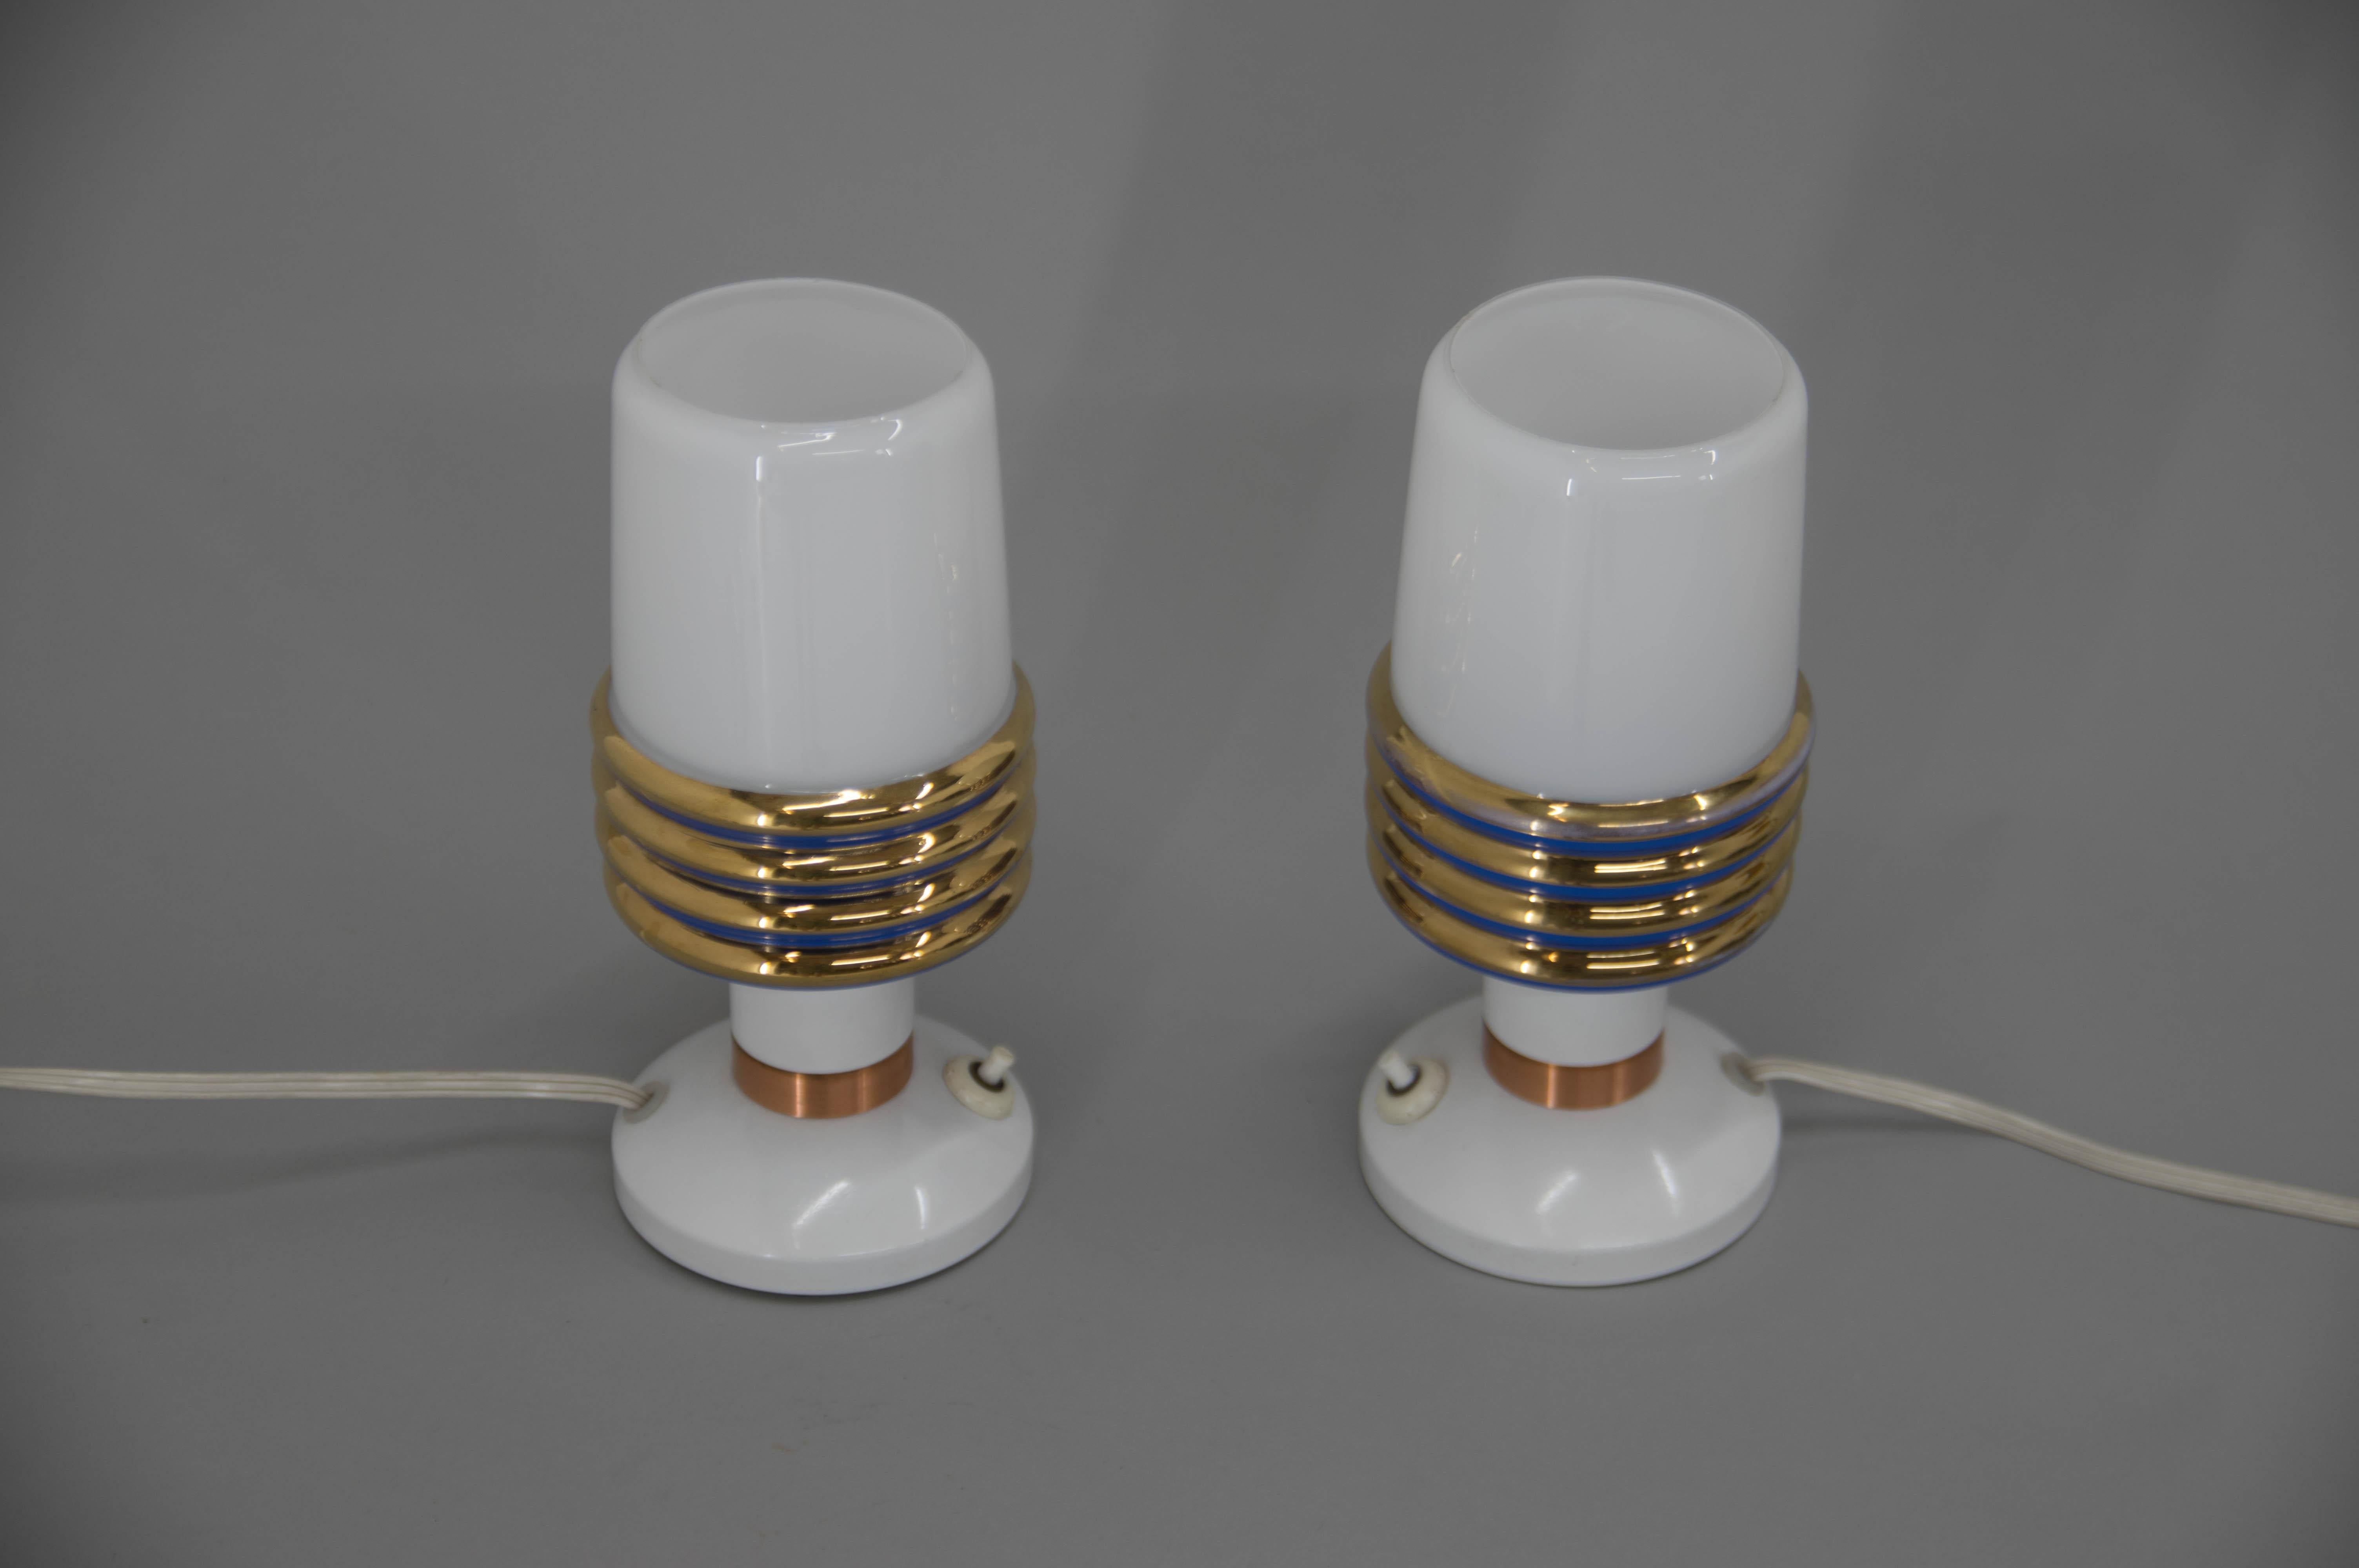 Set of two table lamps made of glass and metal.
Very good original condition
1x40W, E25-E27 bulb
US plug adapter included.